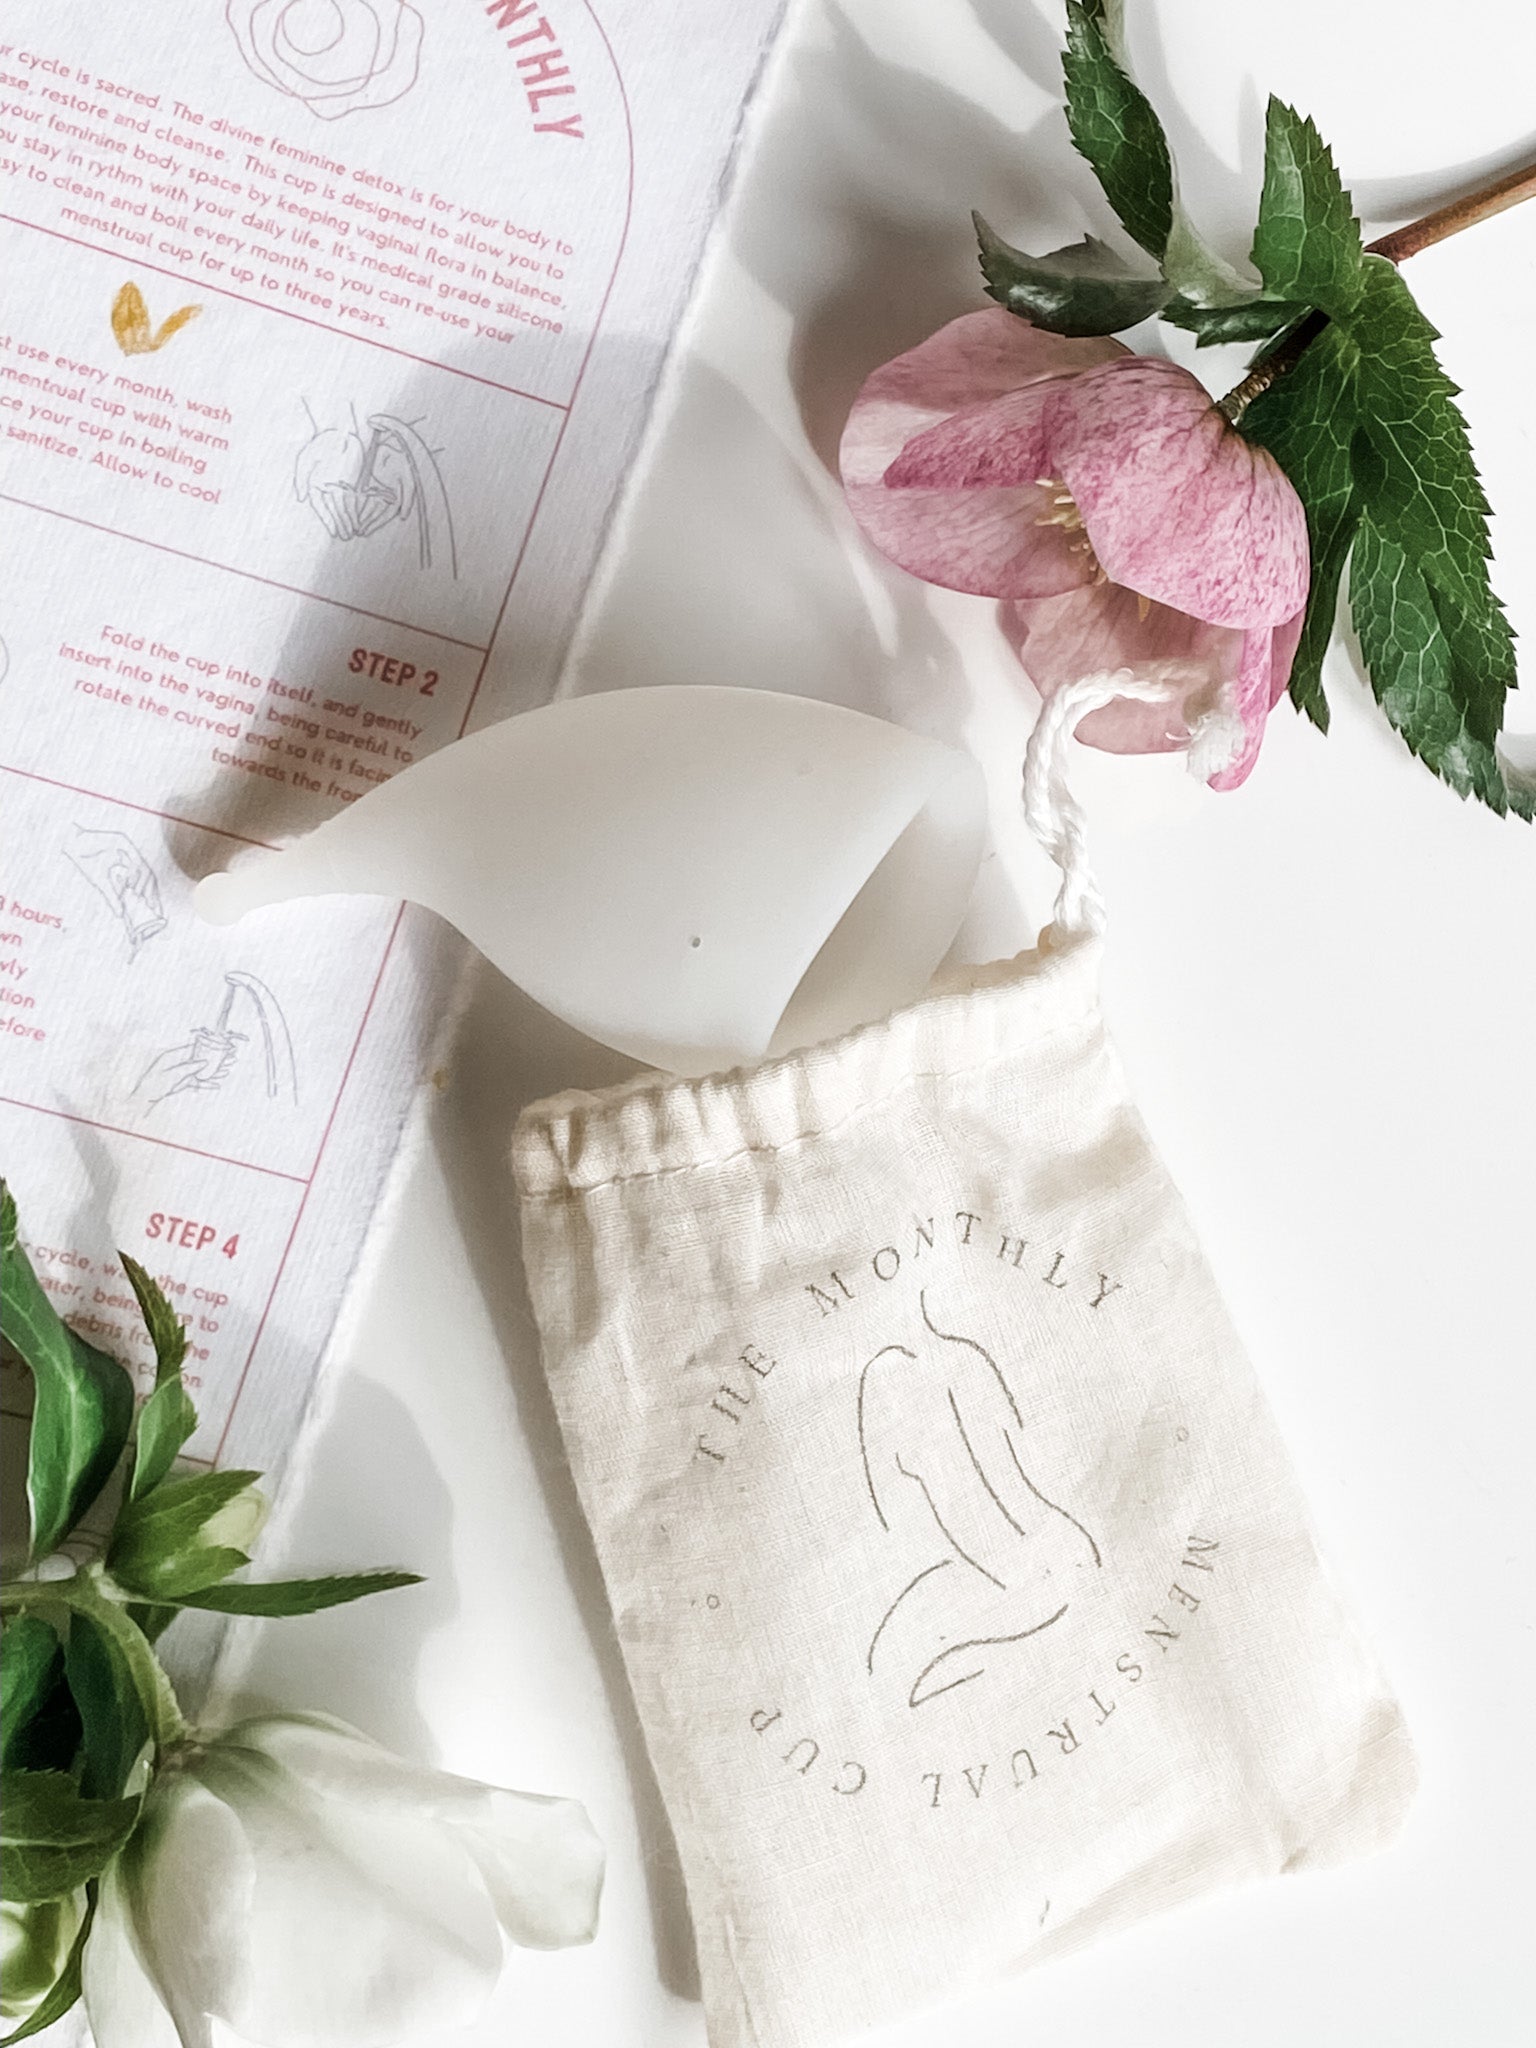 The Monthly Menstrual Cup - Handmade with Natural Ingredients. Hidden Forest Naturals